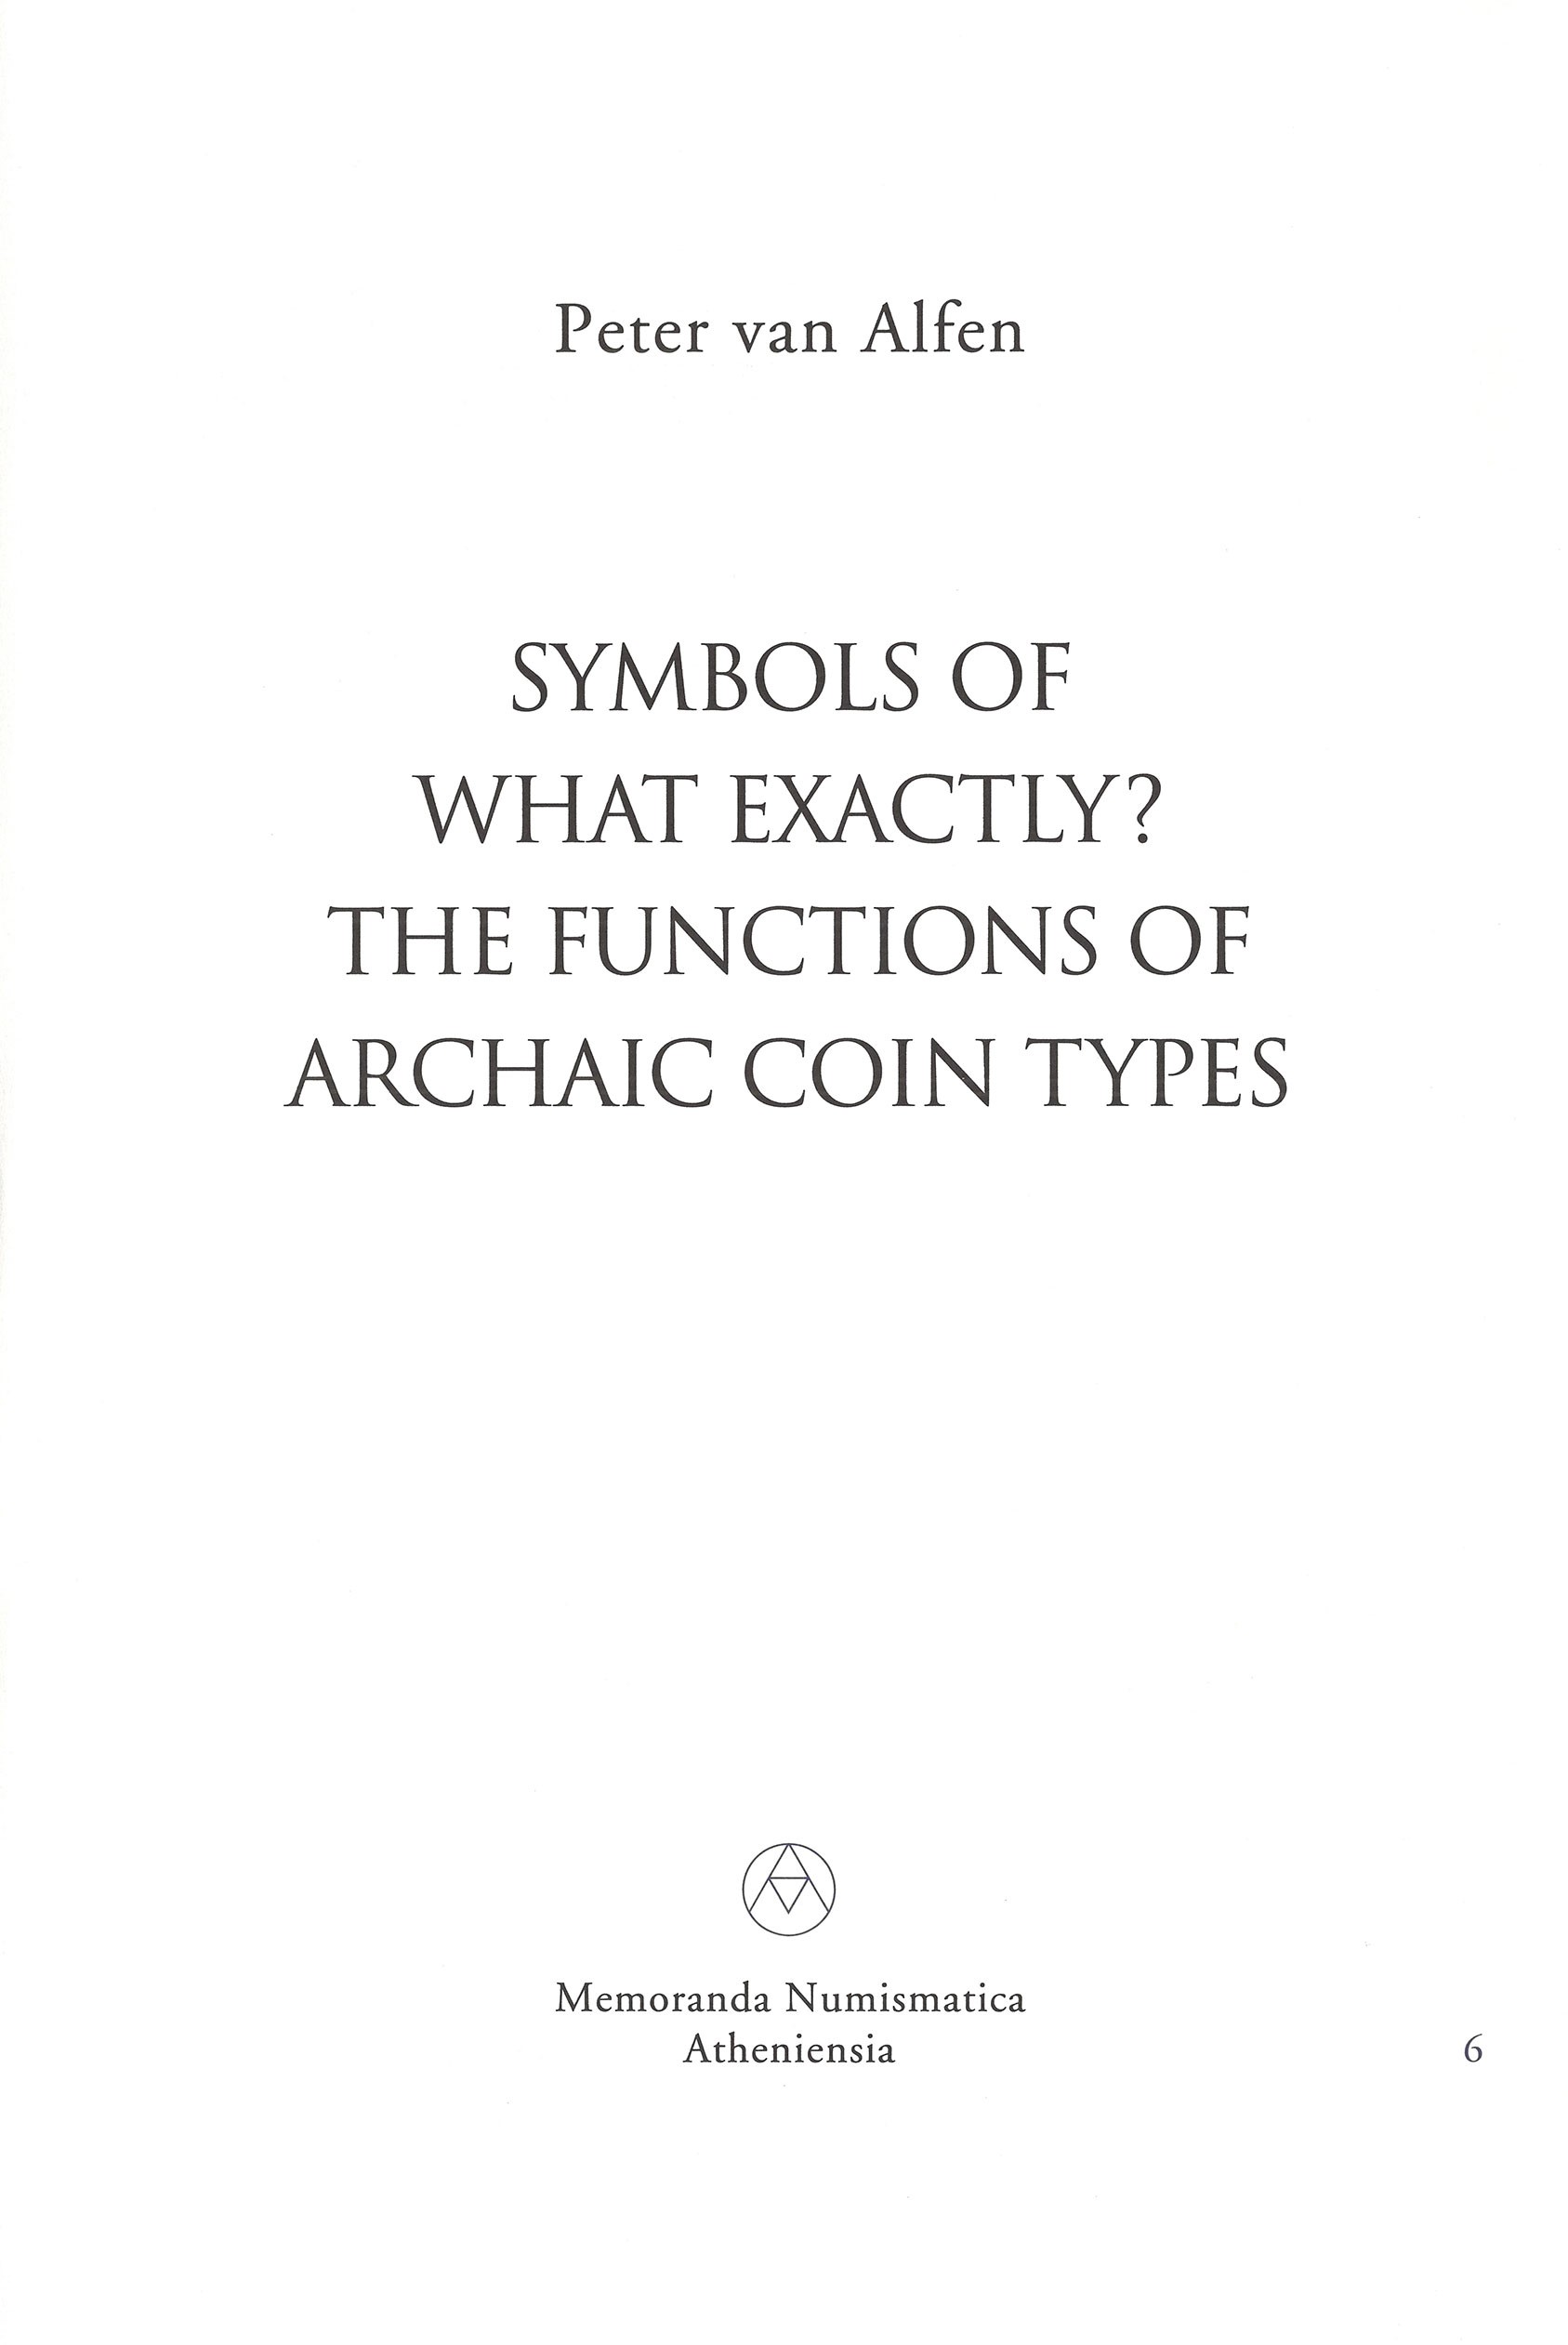 Symbols of what exactly? The semiotics of archaic coin types